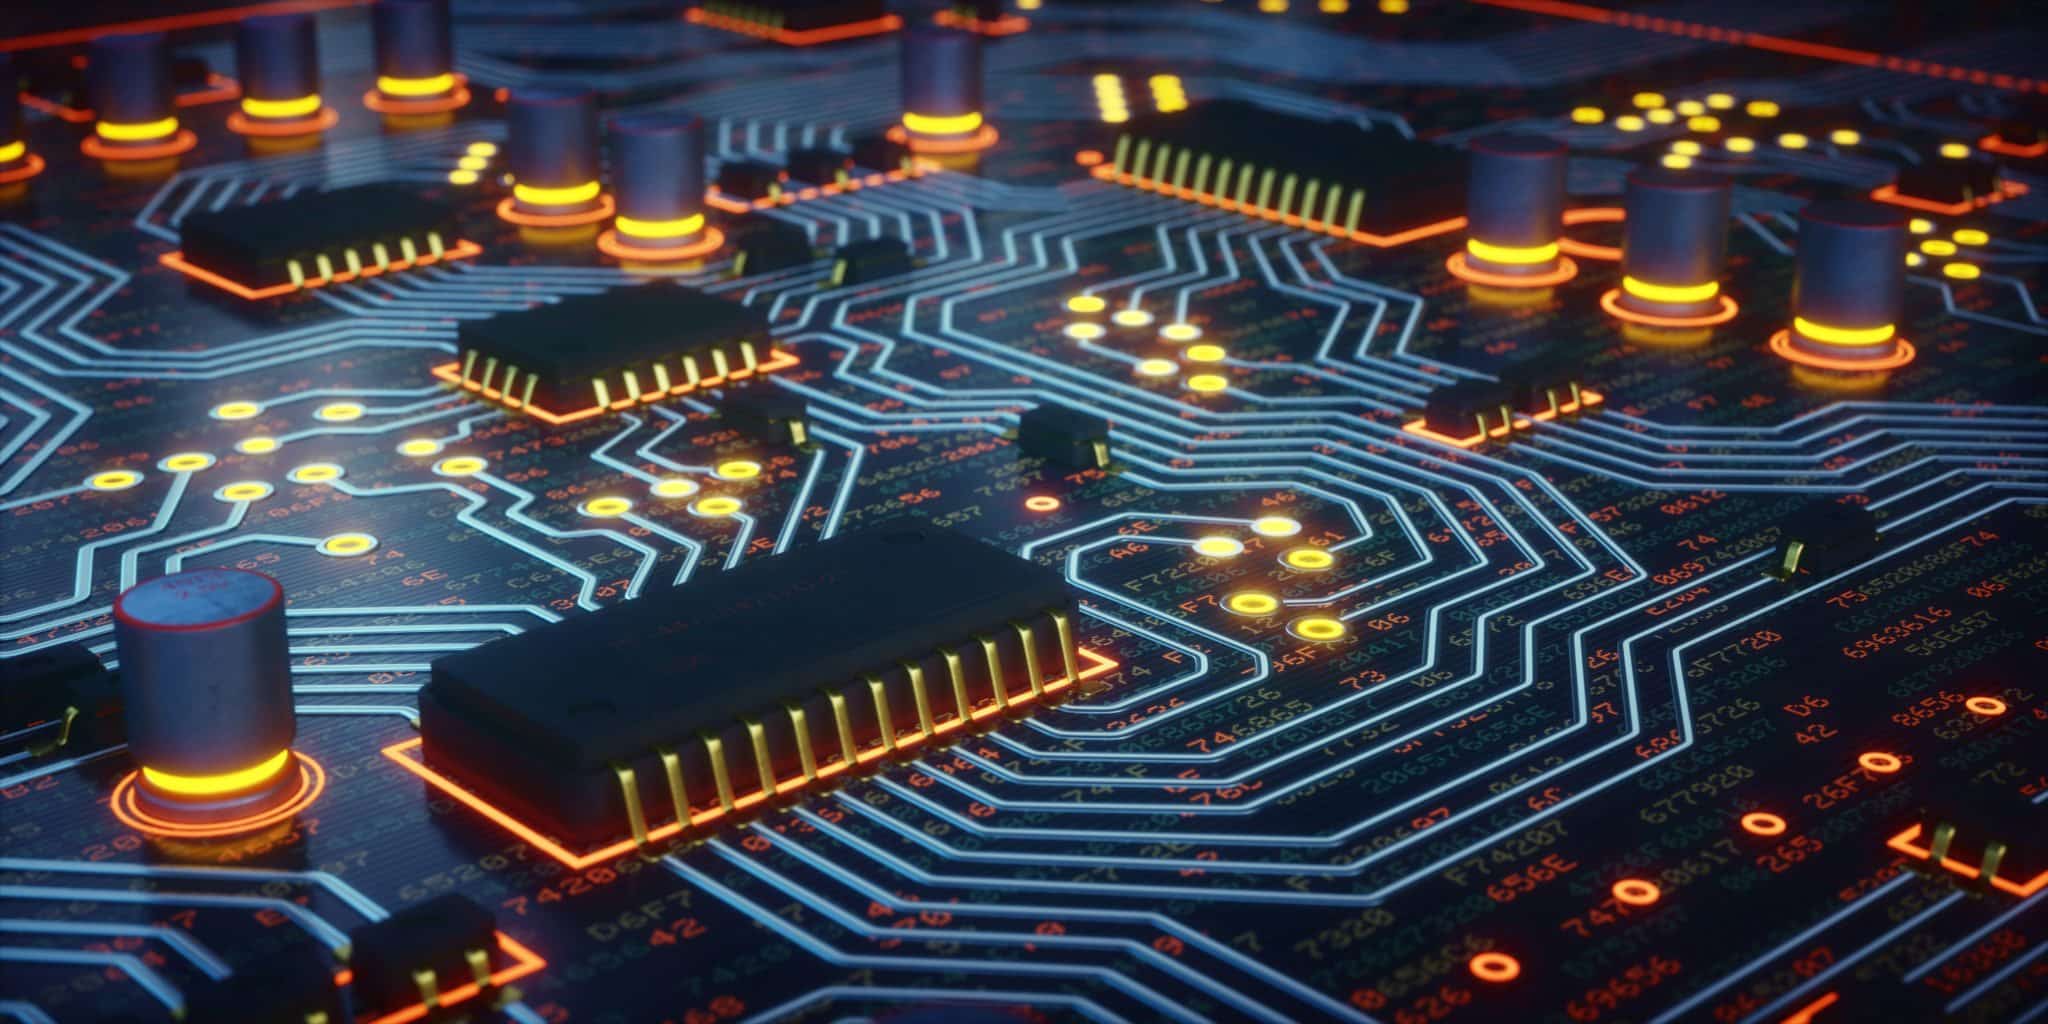 An Abstract 3D Render of Some Microprocessors on a Circuit Board - KX